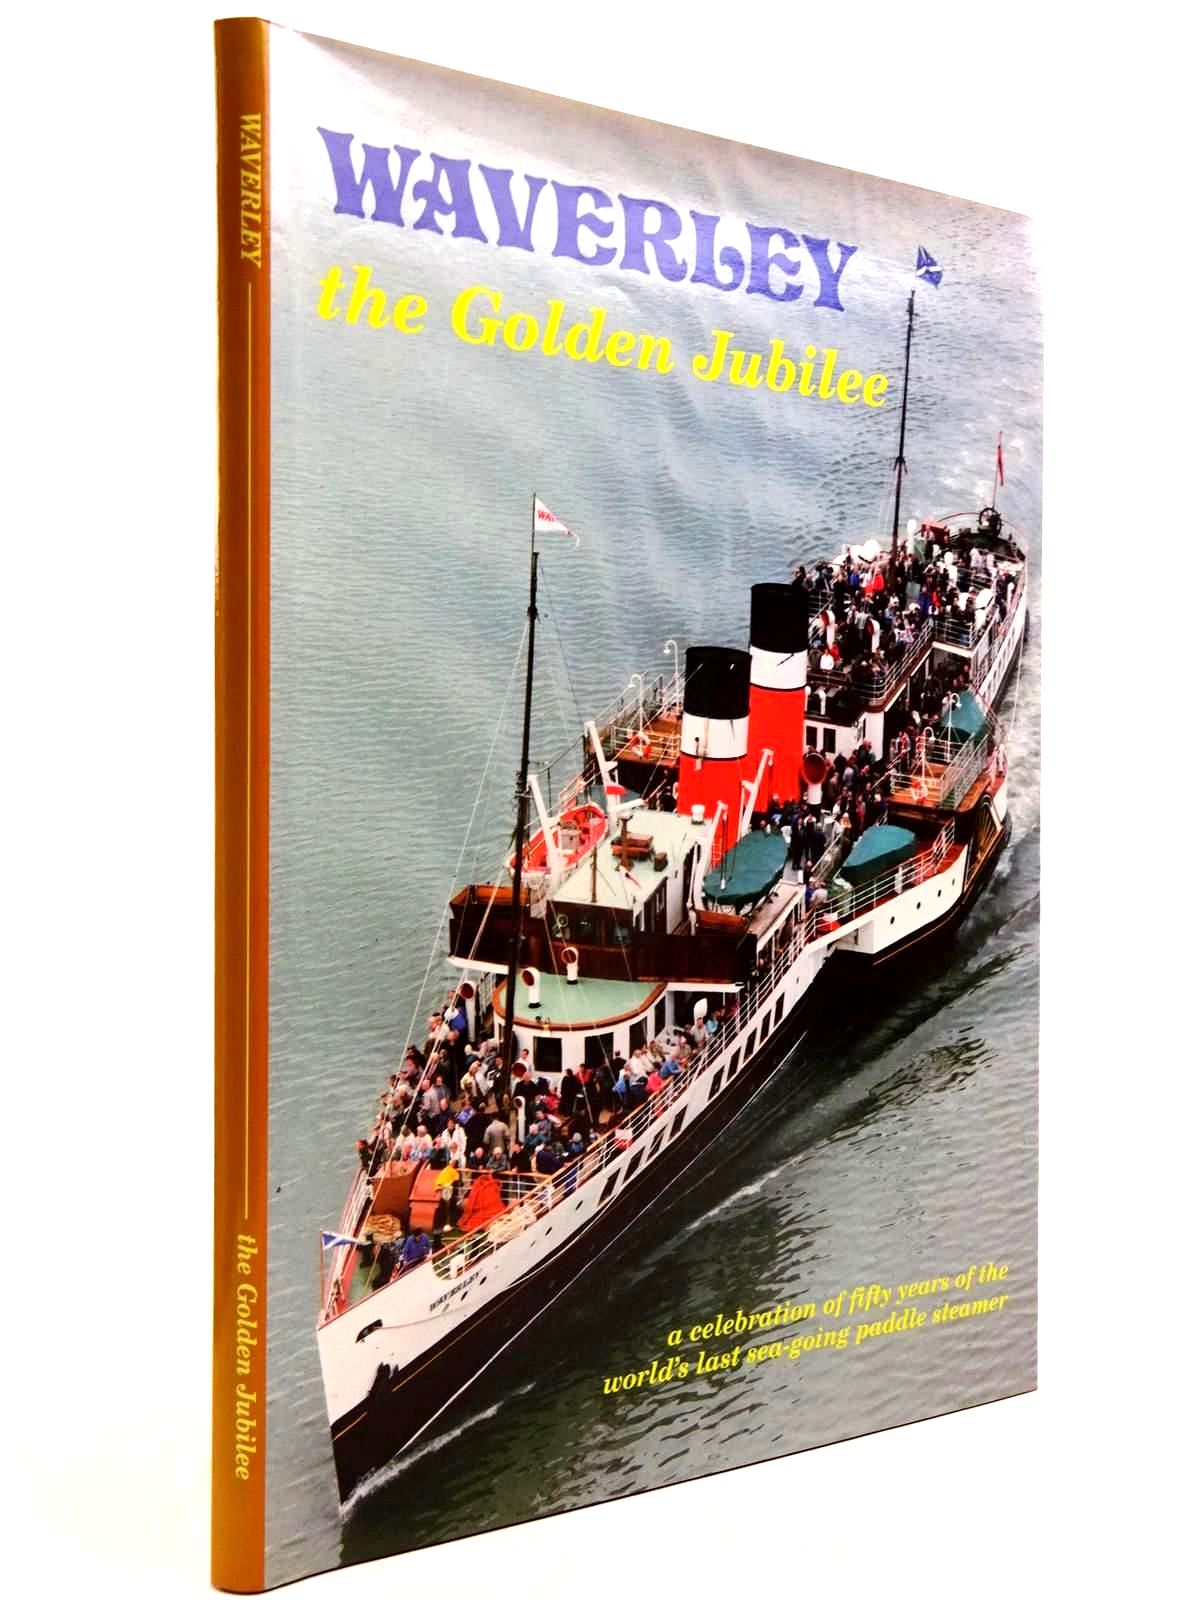 Photo of WAVERLEY THE GOLDEN JUBILEE written by Robinson, Alan published by Allan T. Condie, Waverley Excursions Ltd (STOCK CODE: 2130722)  for sale by Stella & Rose's Books